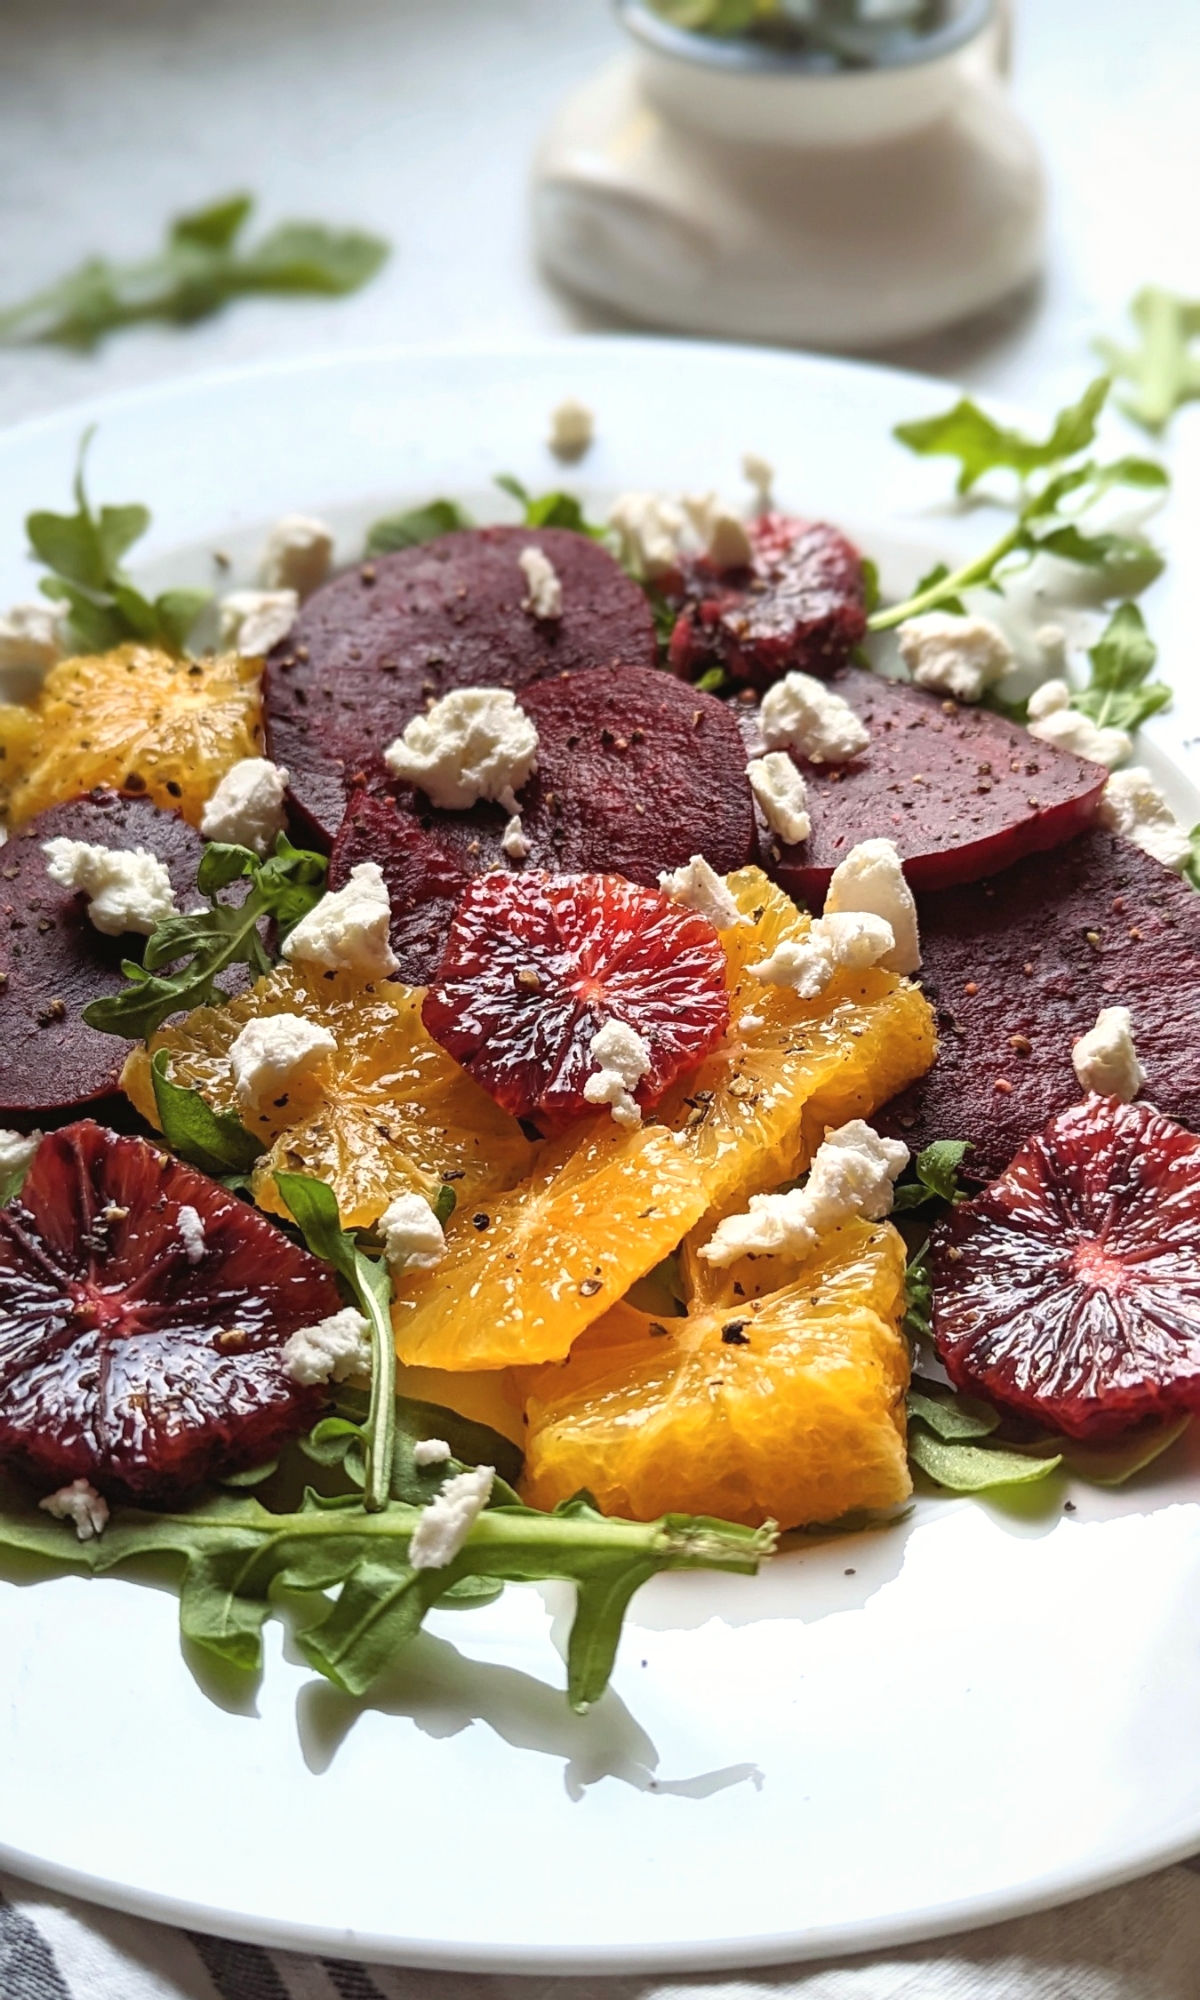 citrus beet salad recipe with goat cheese and arugula, elegant salads for entertaining guests potlucks and dinner parties